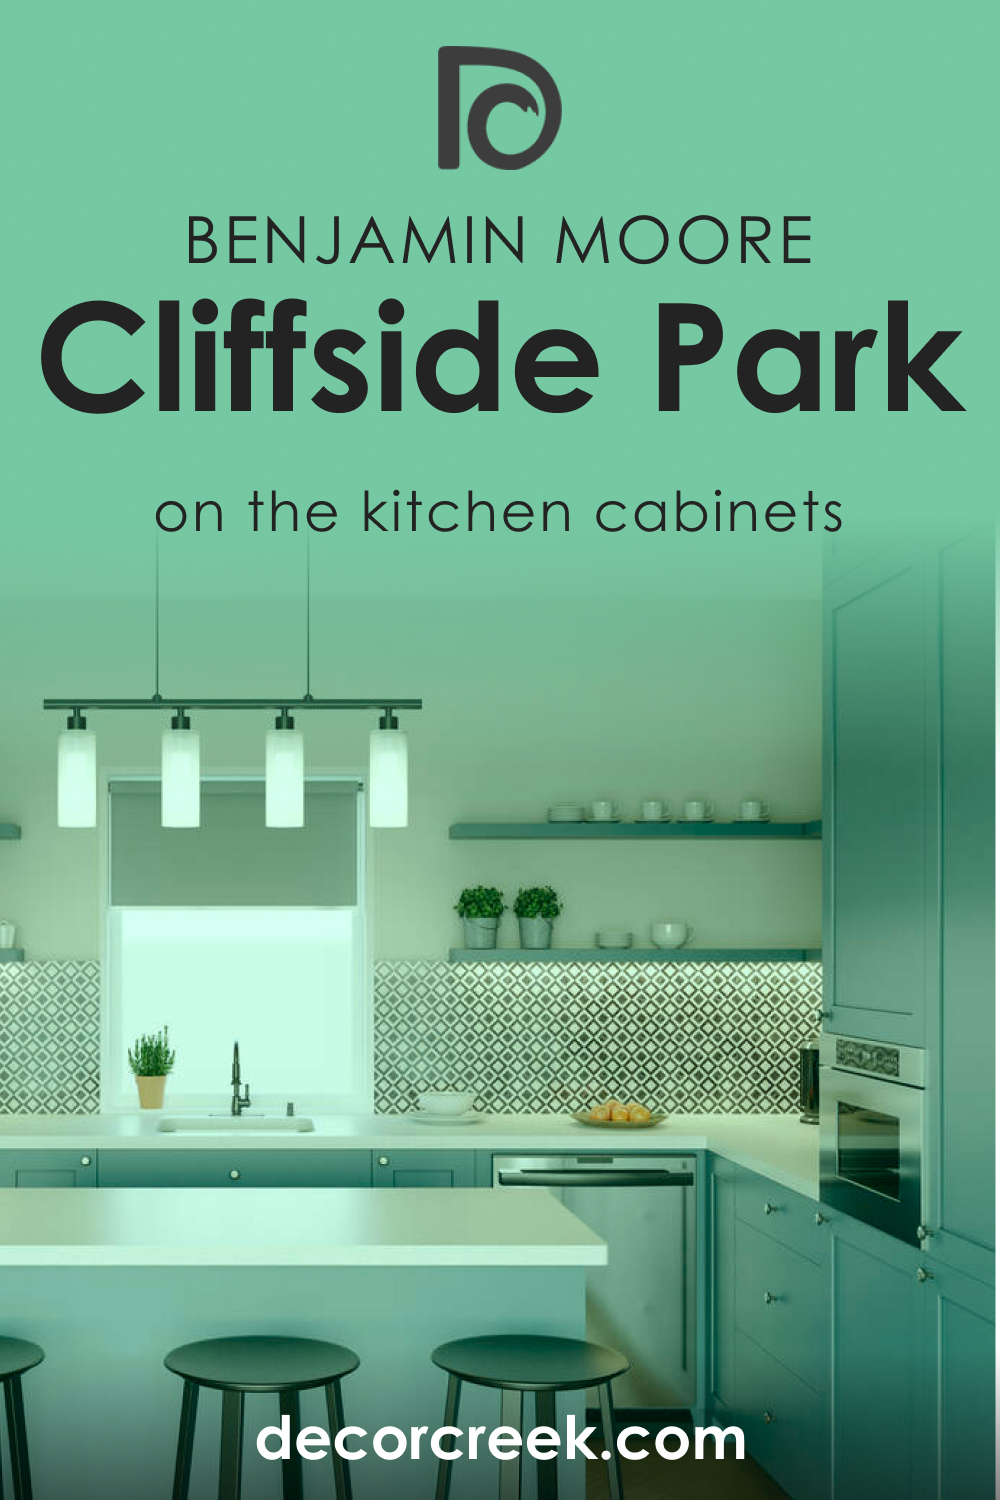 How to Use Cliffside Park 579 on the Kitchen Cabinets?